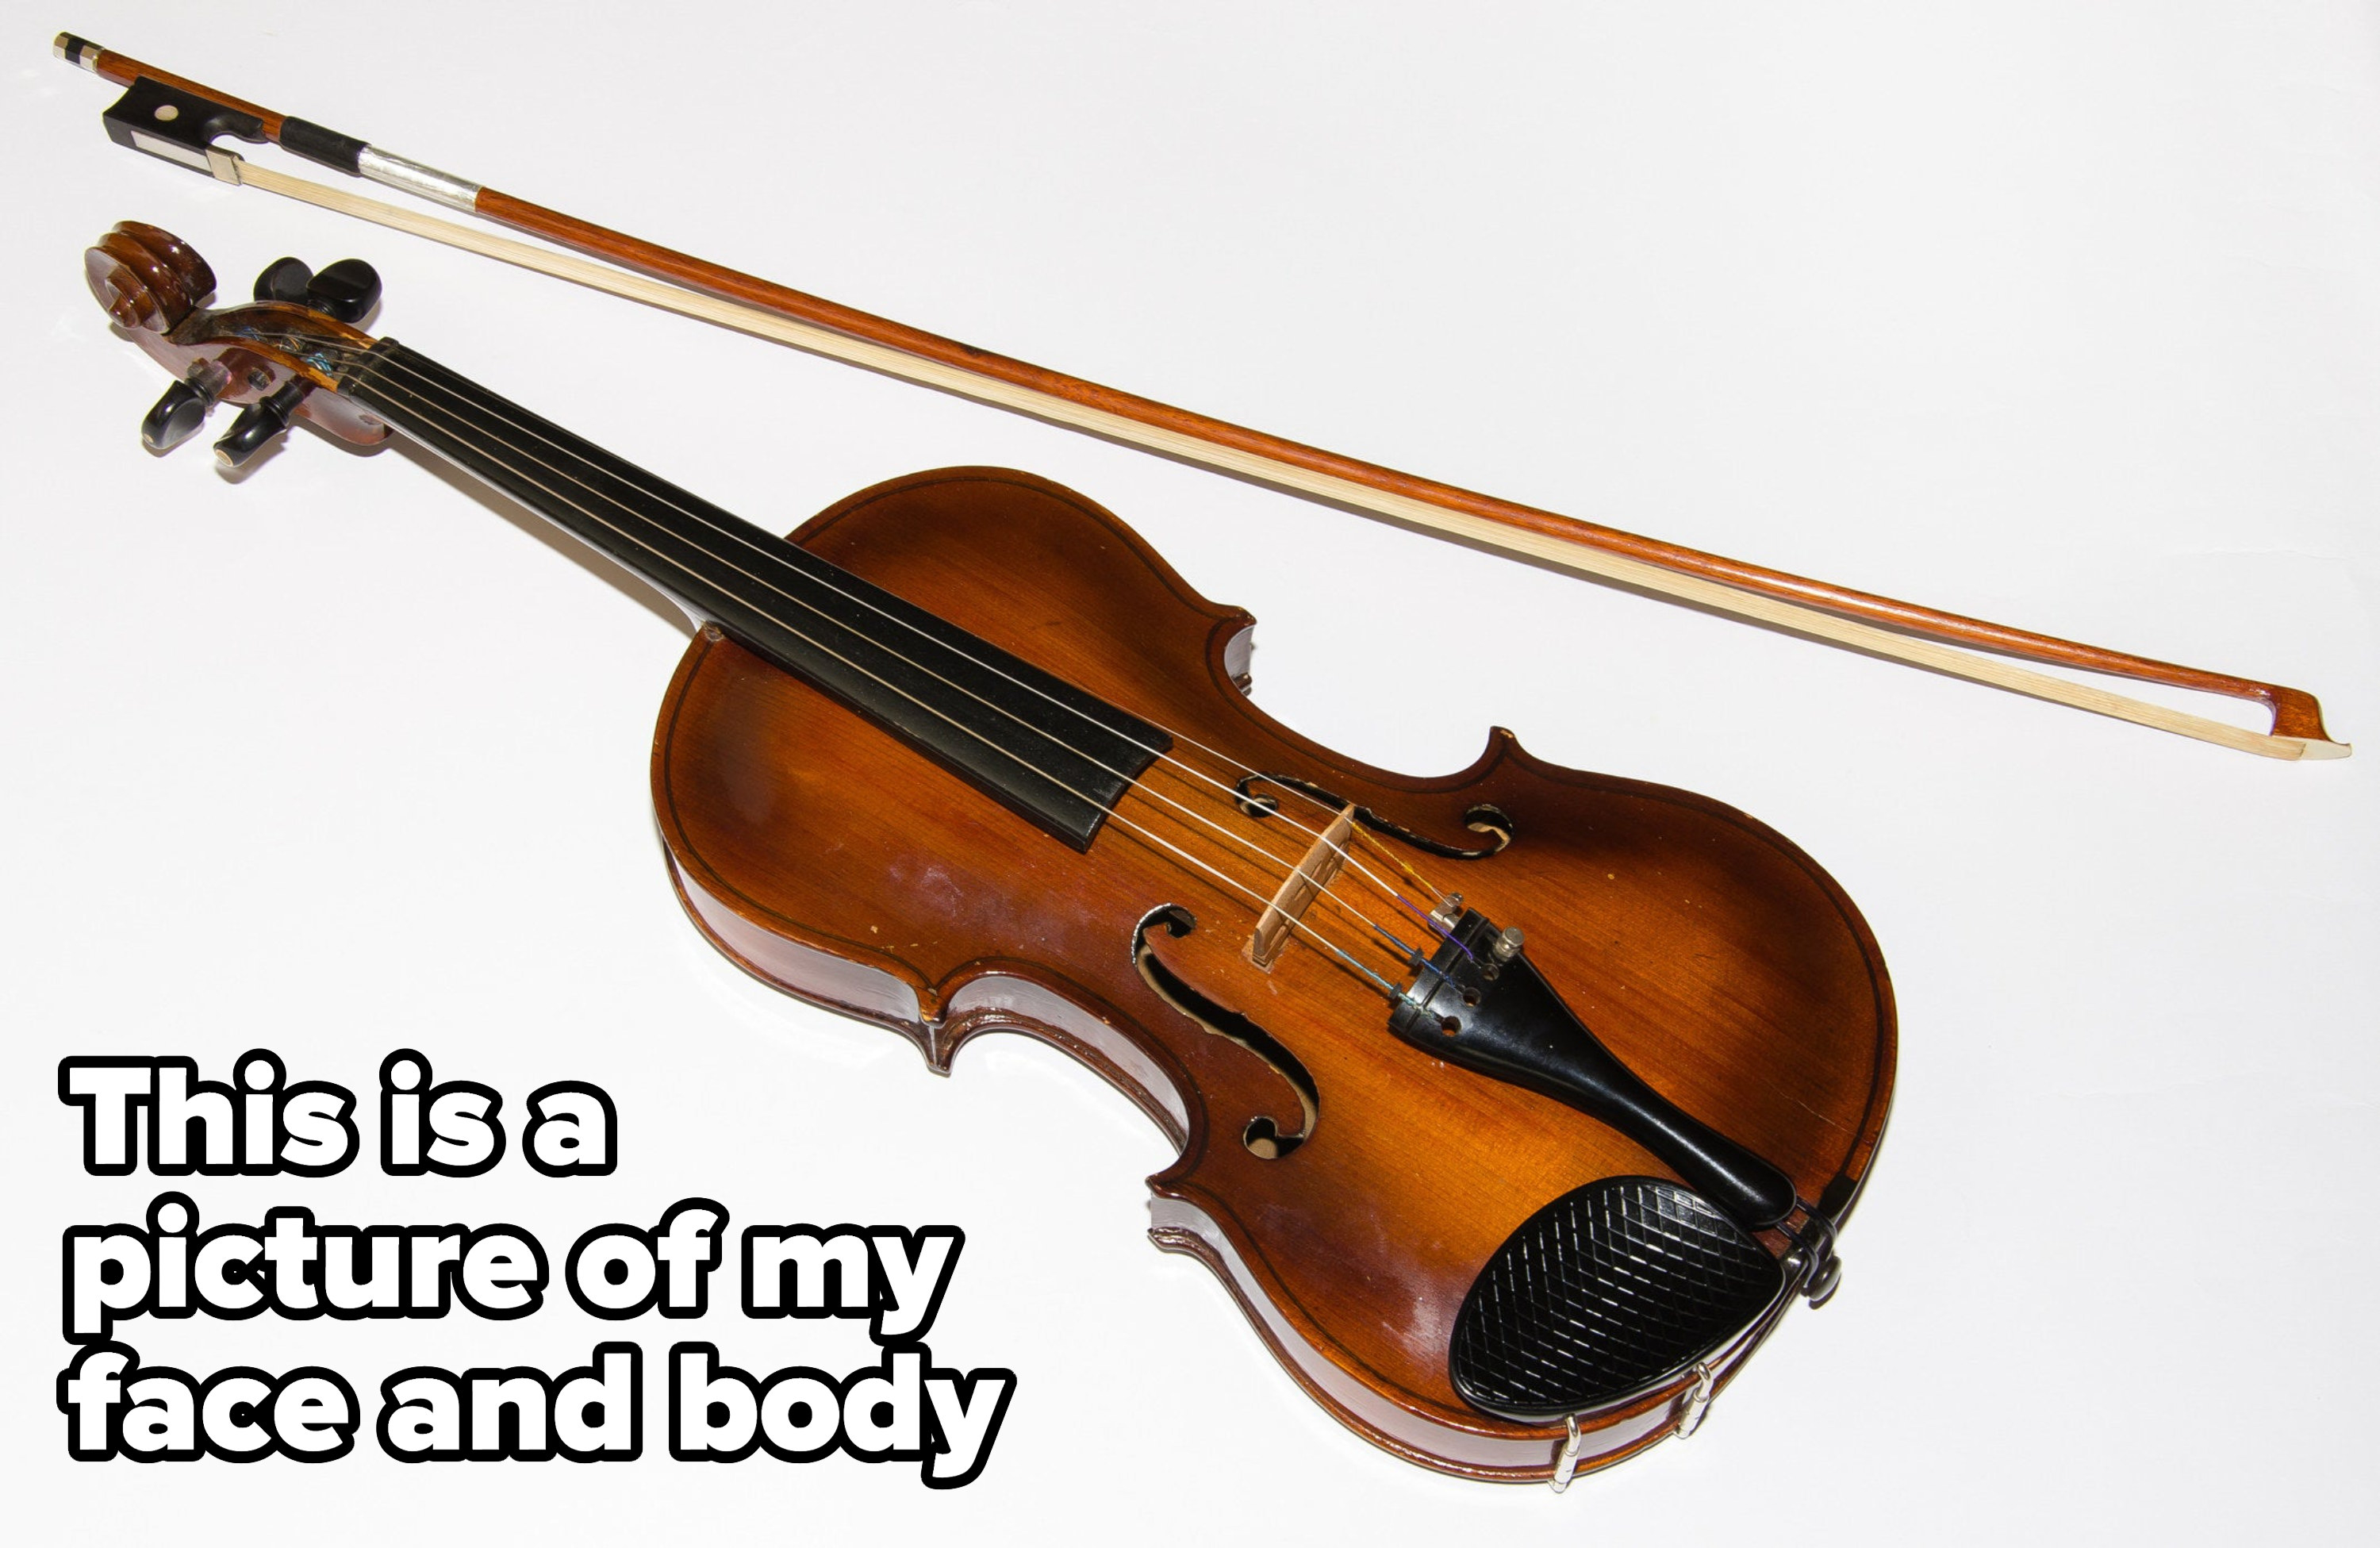 A picture of a violin is a picture of my face and body